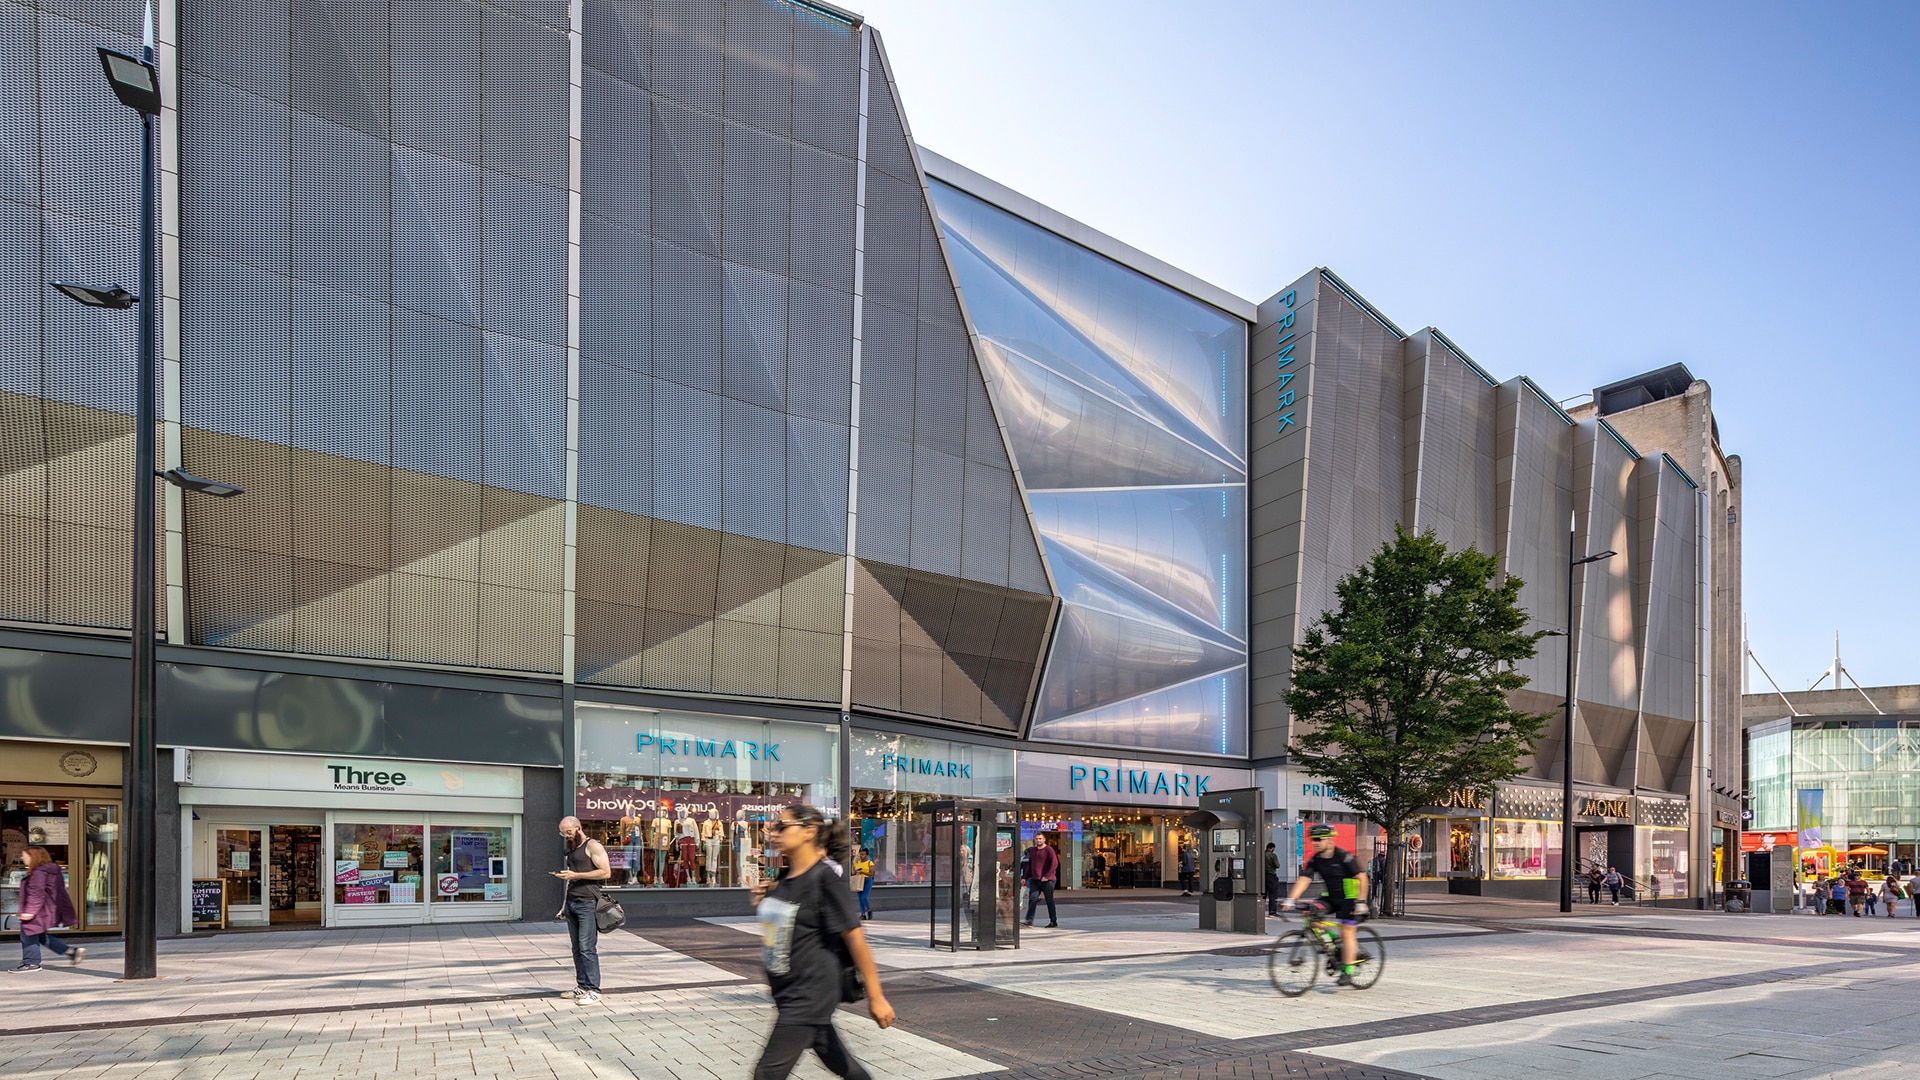 The world’s largest Primark store in Birmingham has a new face and it is made out of Texlon® ETFE by Vector Foiltec - a beautiful facade.